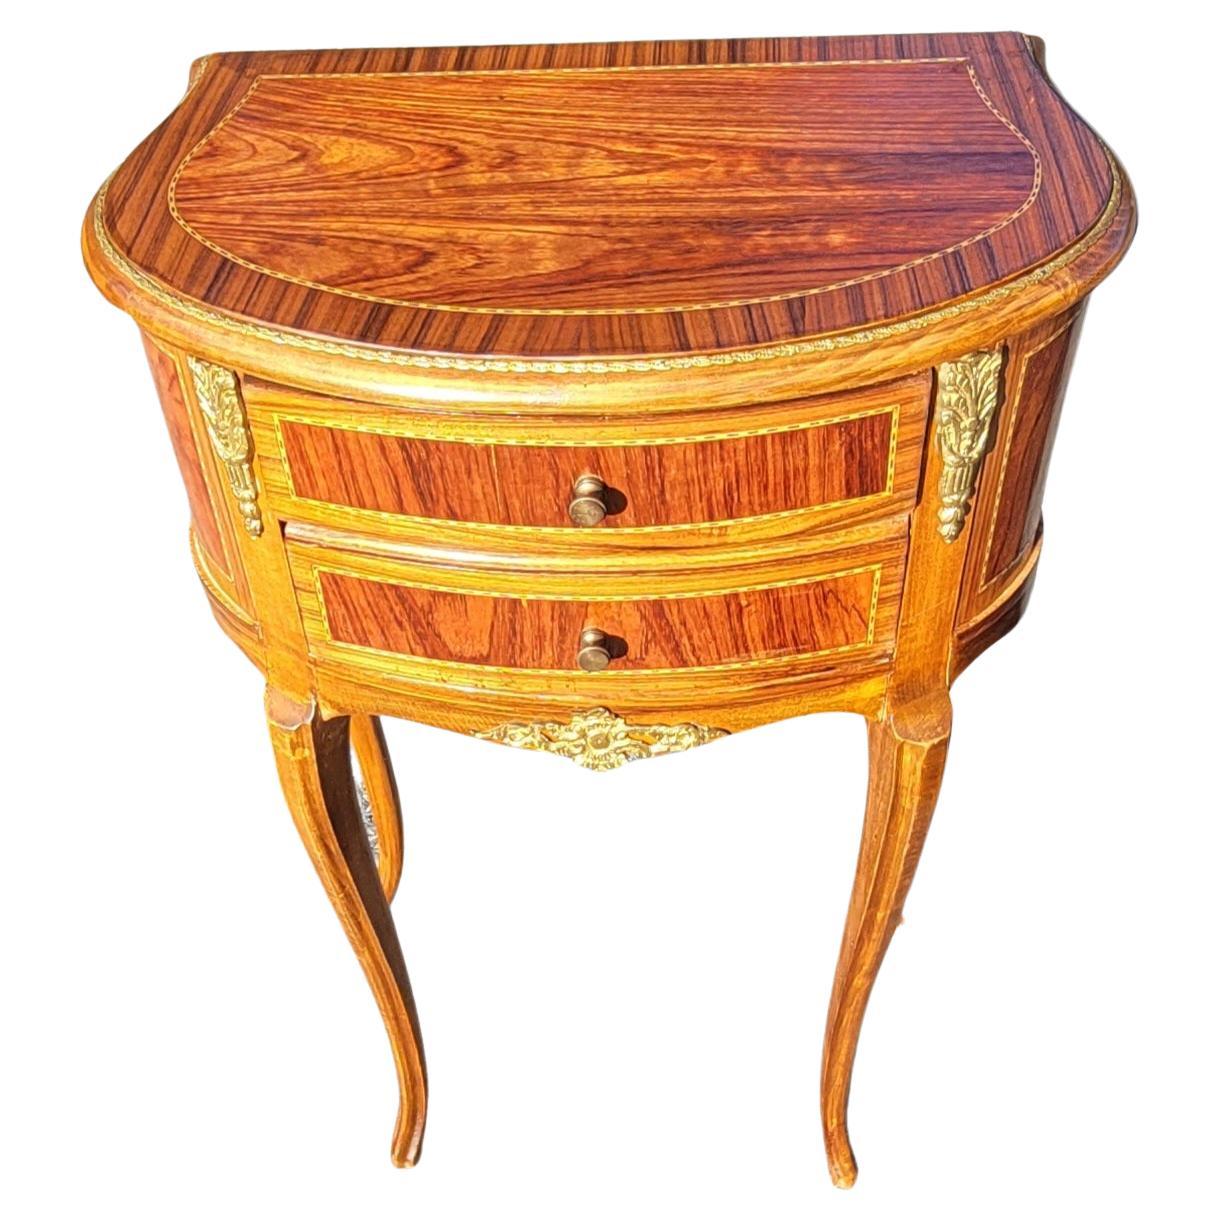 Absolutely gorgeous 20th Century French Louis XV two-drawer Walnut and Satinwood Inlaid Ormolu mounted Side Table. Very fine satinwood  inlay works. Measures 19.5